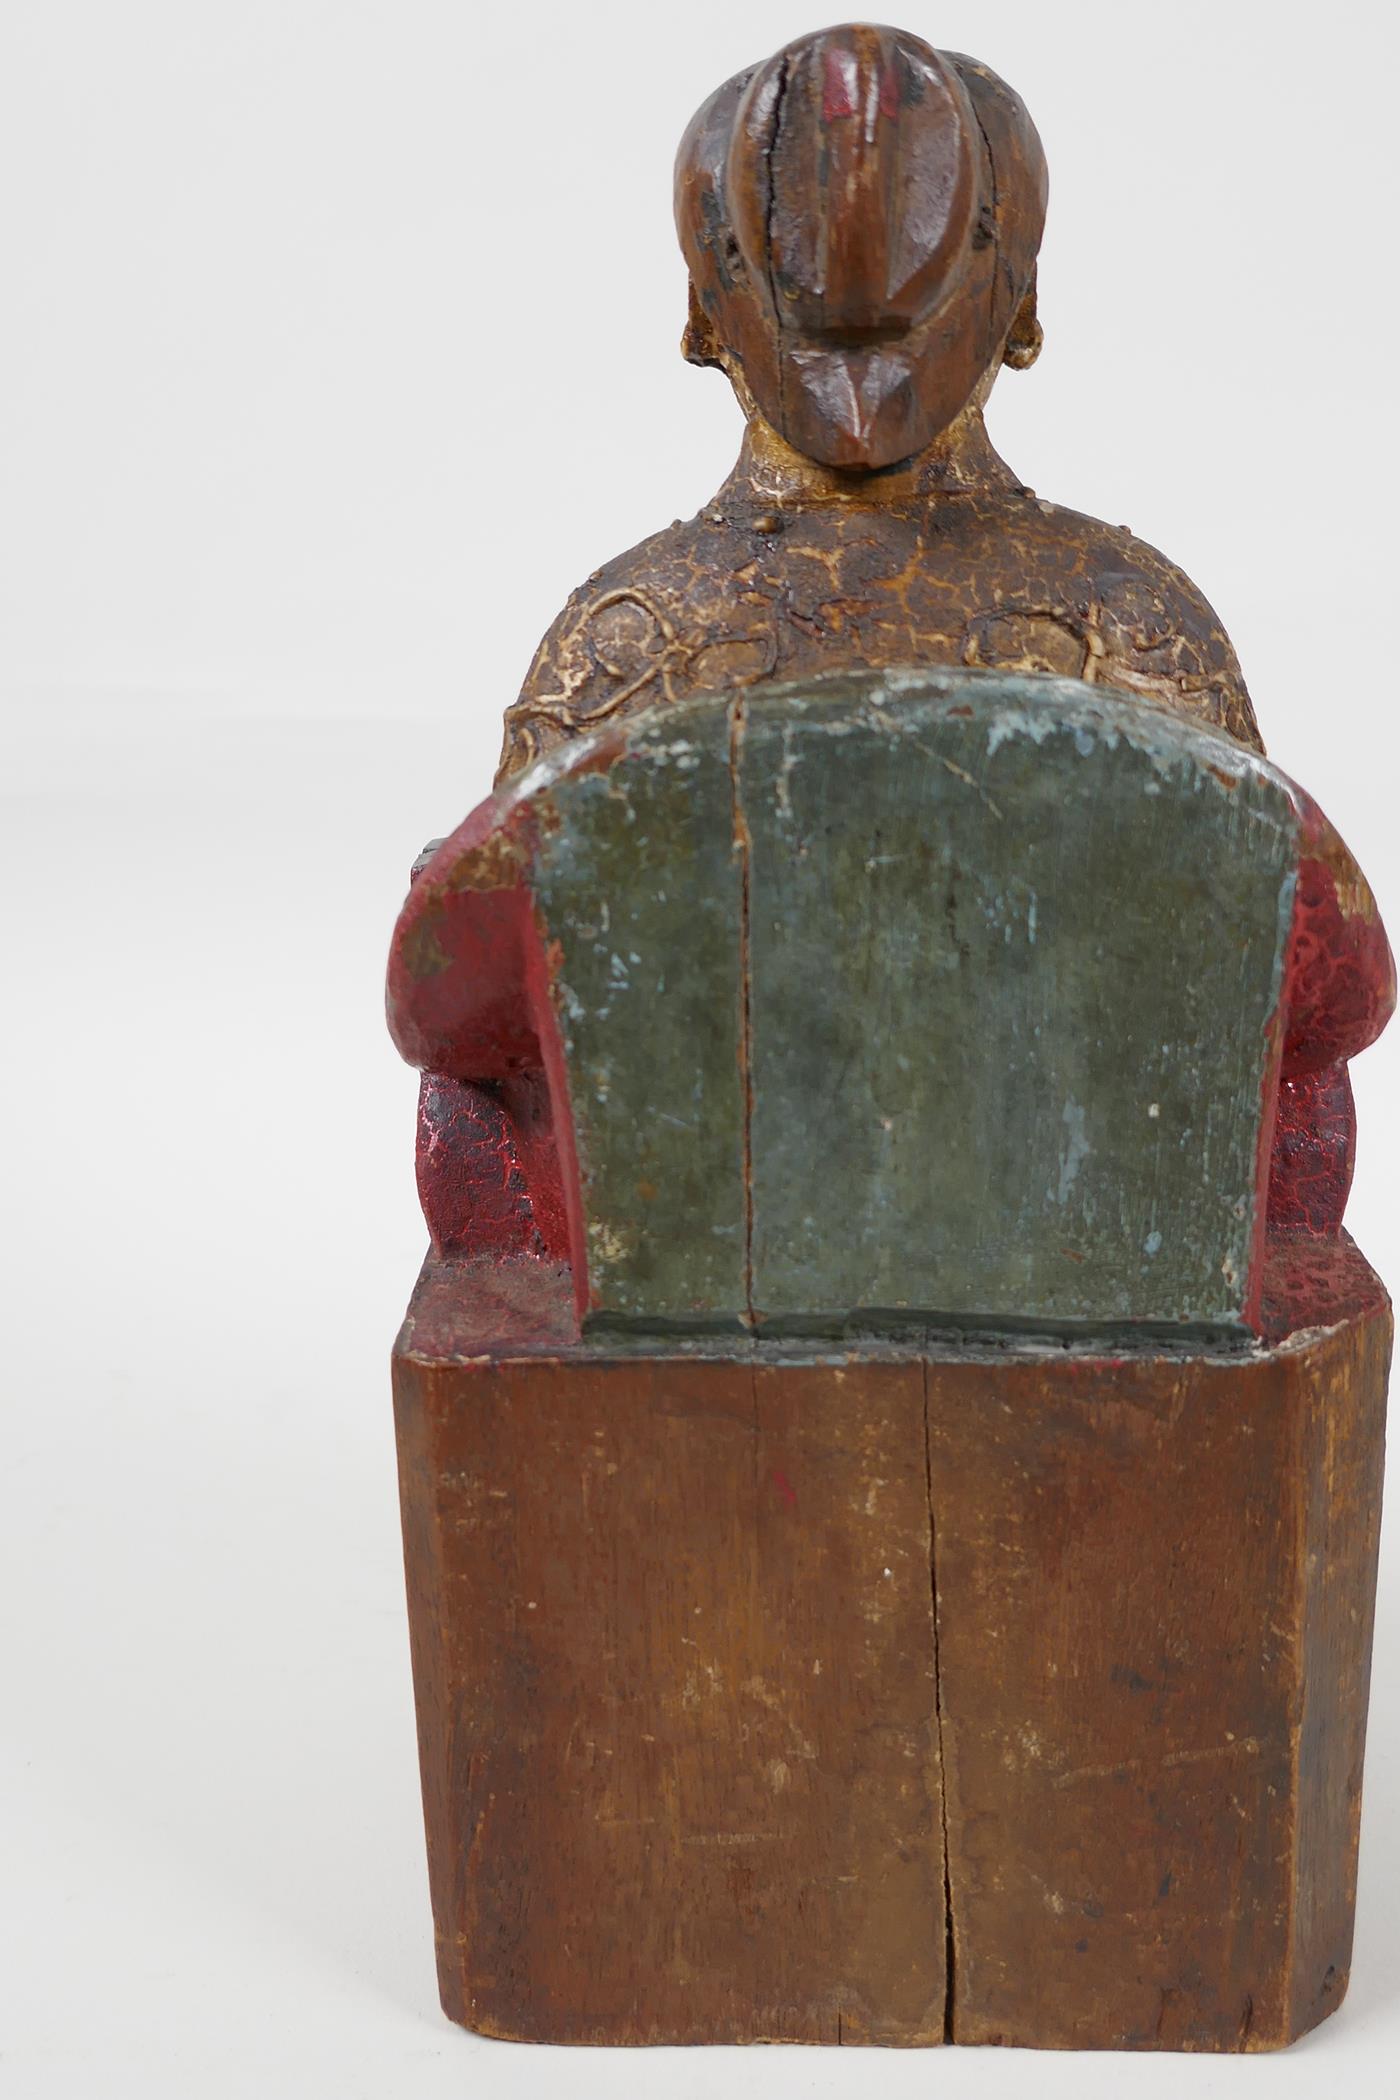 A Chinese carved wood figure of a dignitary seated on a throne, traces of paint, 9" high - Image 4 of 6